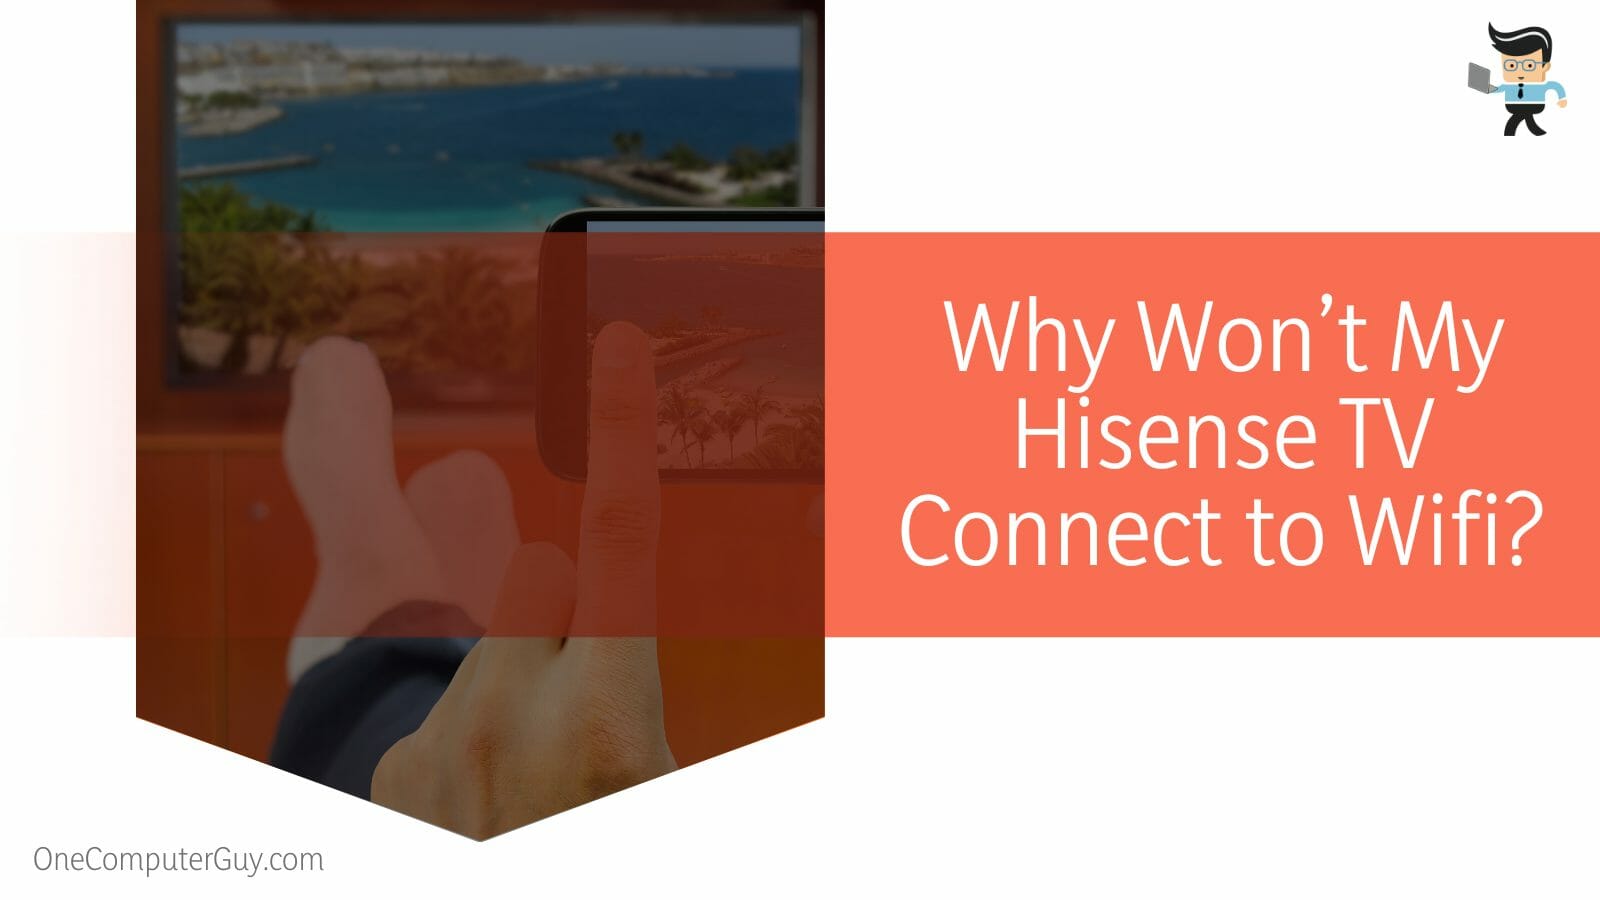 My Hisense TV Connect to Wifi